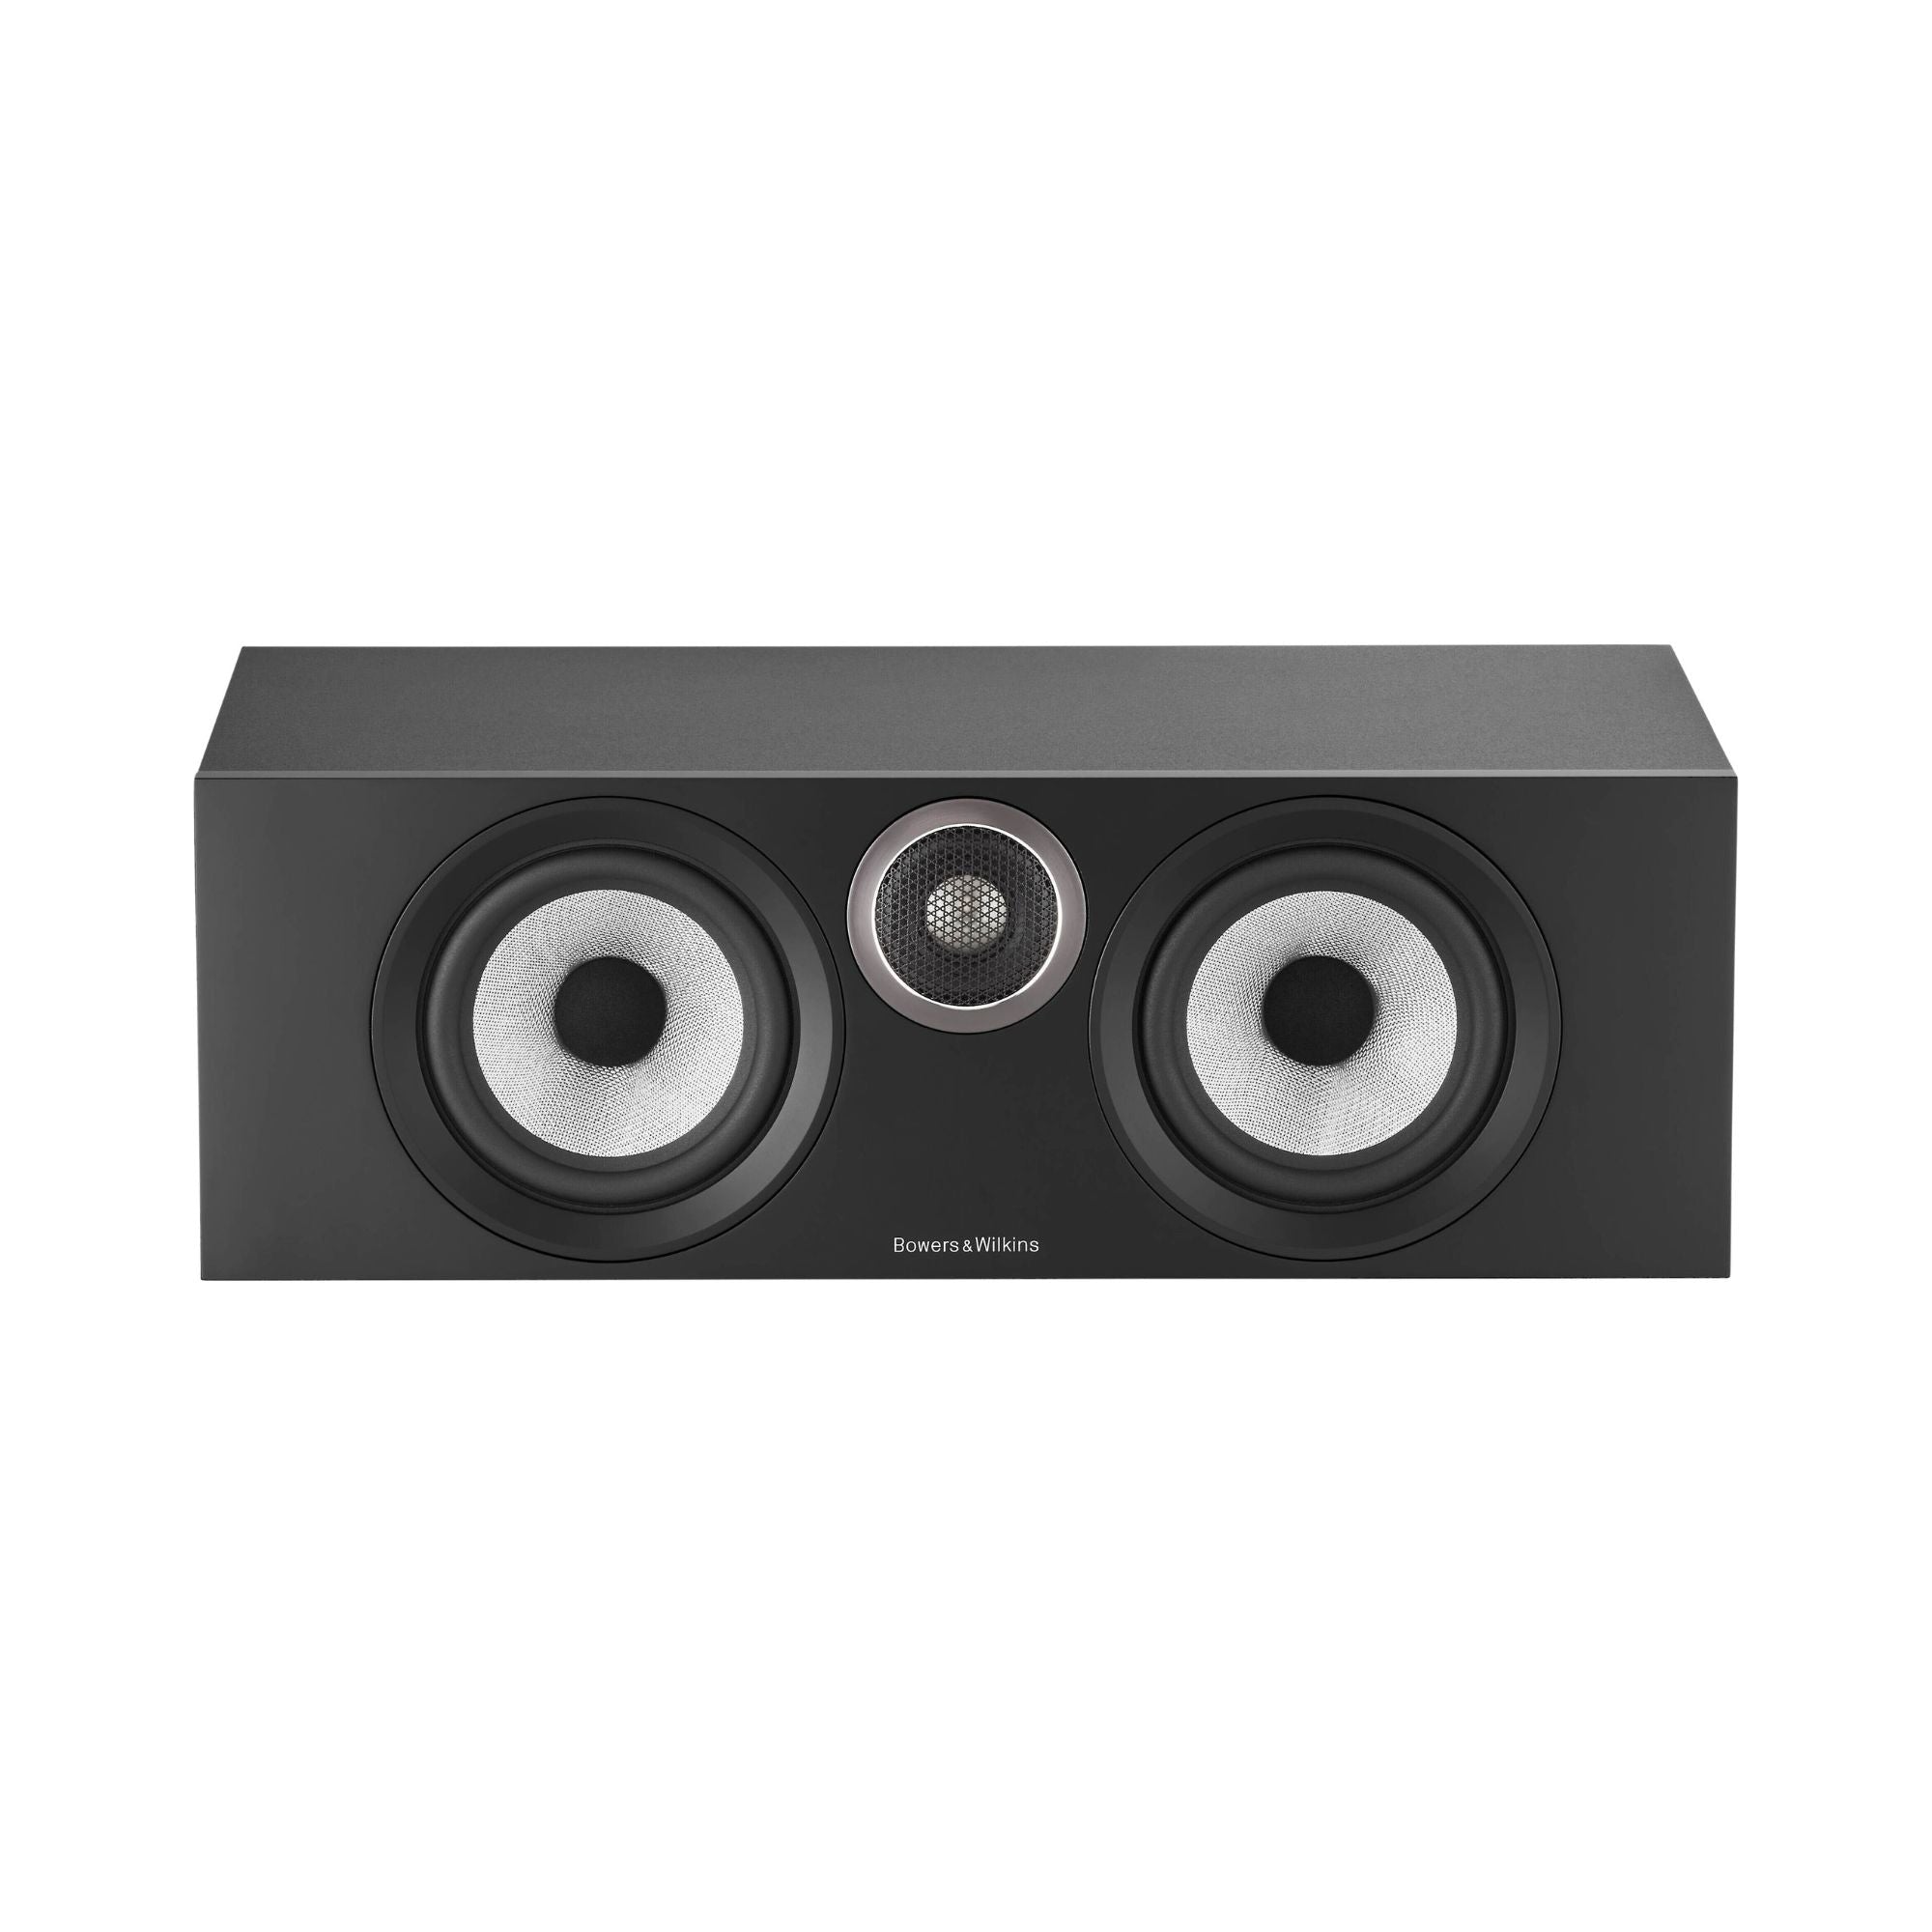 Bowers & Wilkins HTM6 S3 2-Way Center Channel Speaker, Bowers & Wilkins, Centre Channel Speaker - AVStore.in